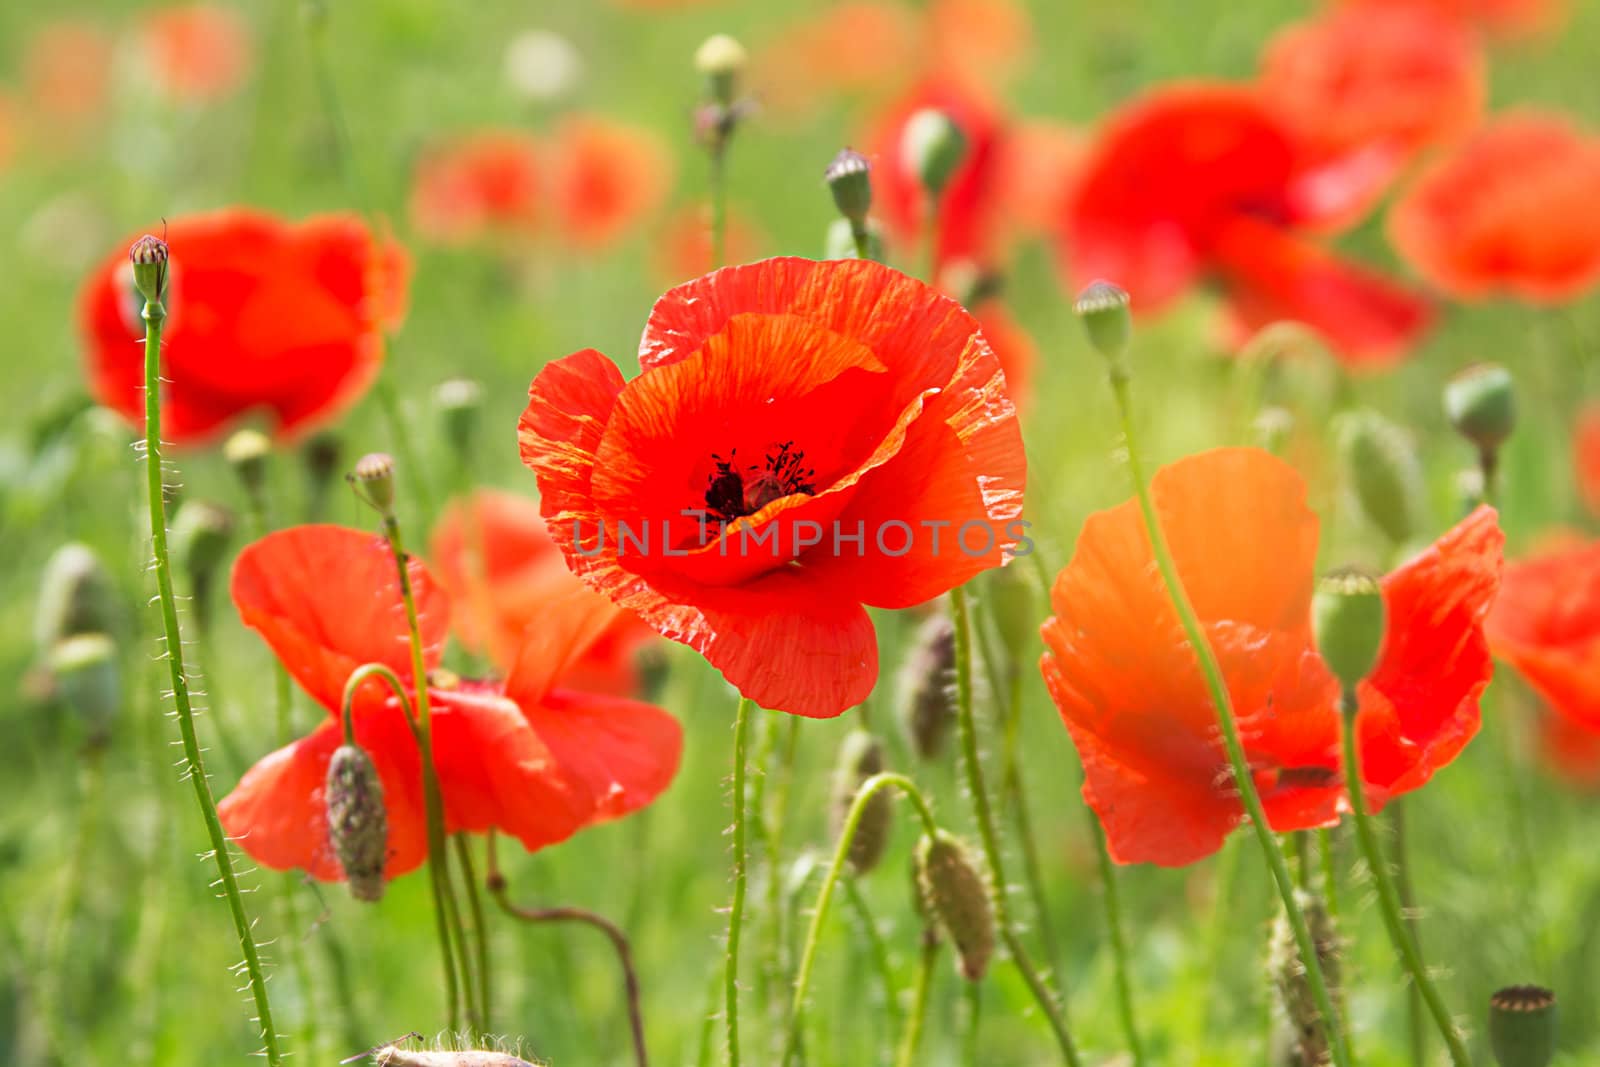 Some poppies on green field by Angel_a